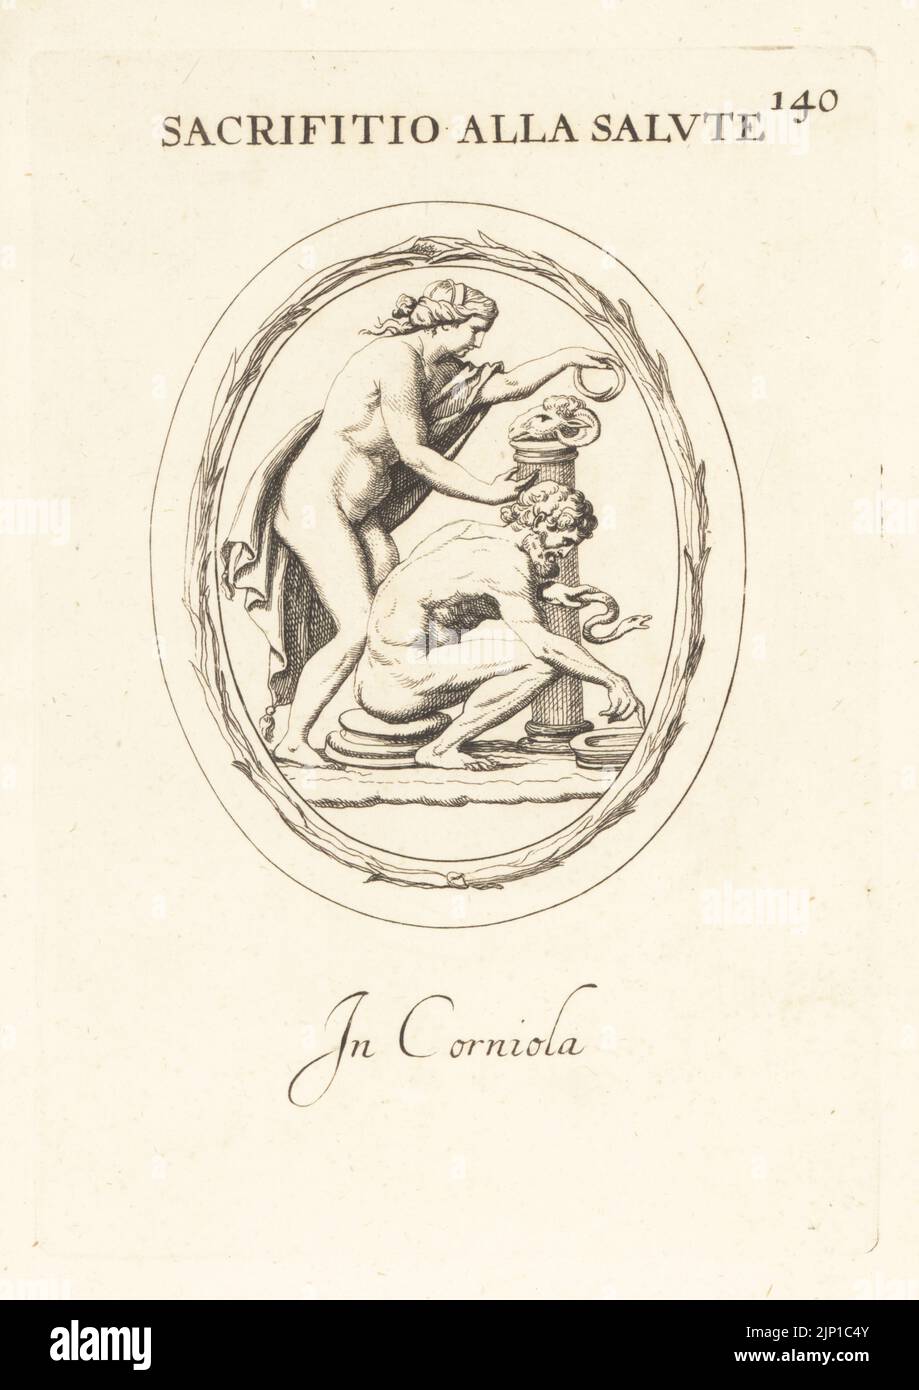 Rustic man and woman making a sacrifice to health. Offering a serpent to Aesculapius, and a ram's head on an altar. In carnelian. Sacrifitio alla Salute. In corniola. Copperplate engraving by Giovanni Battista Galestruzzi after Leonardo Agostini from Gemmae et Sculpturae Antiquae Depicti ab Leonardo Augustino Senesi, Abraham Blooteling, Amsterdam, 1685. Stock Photo